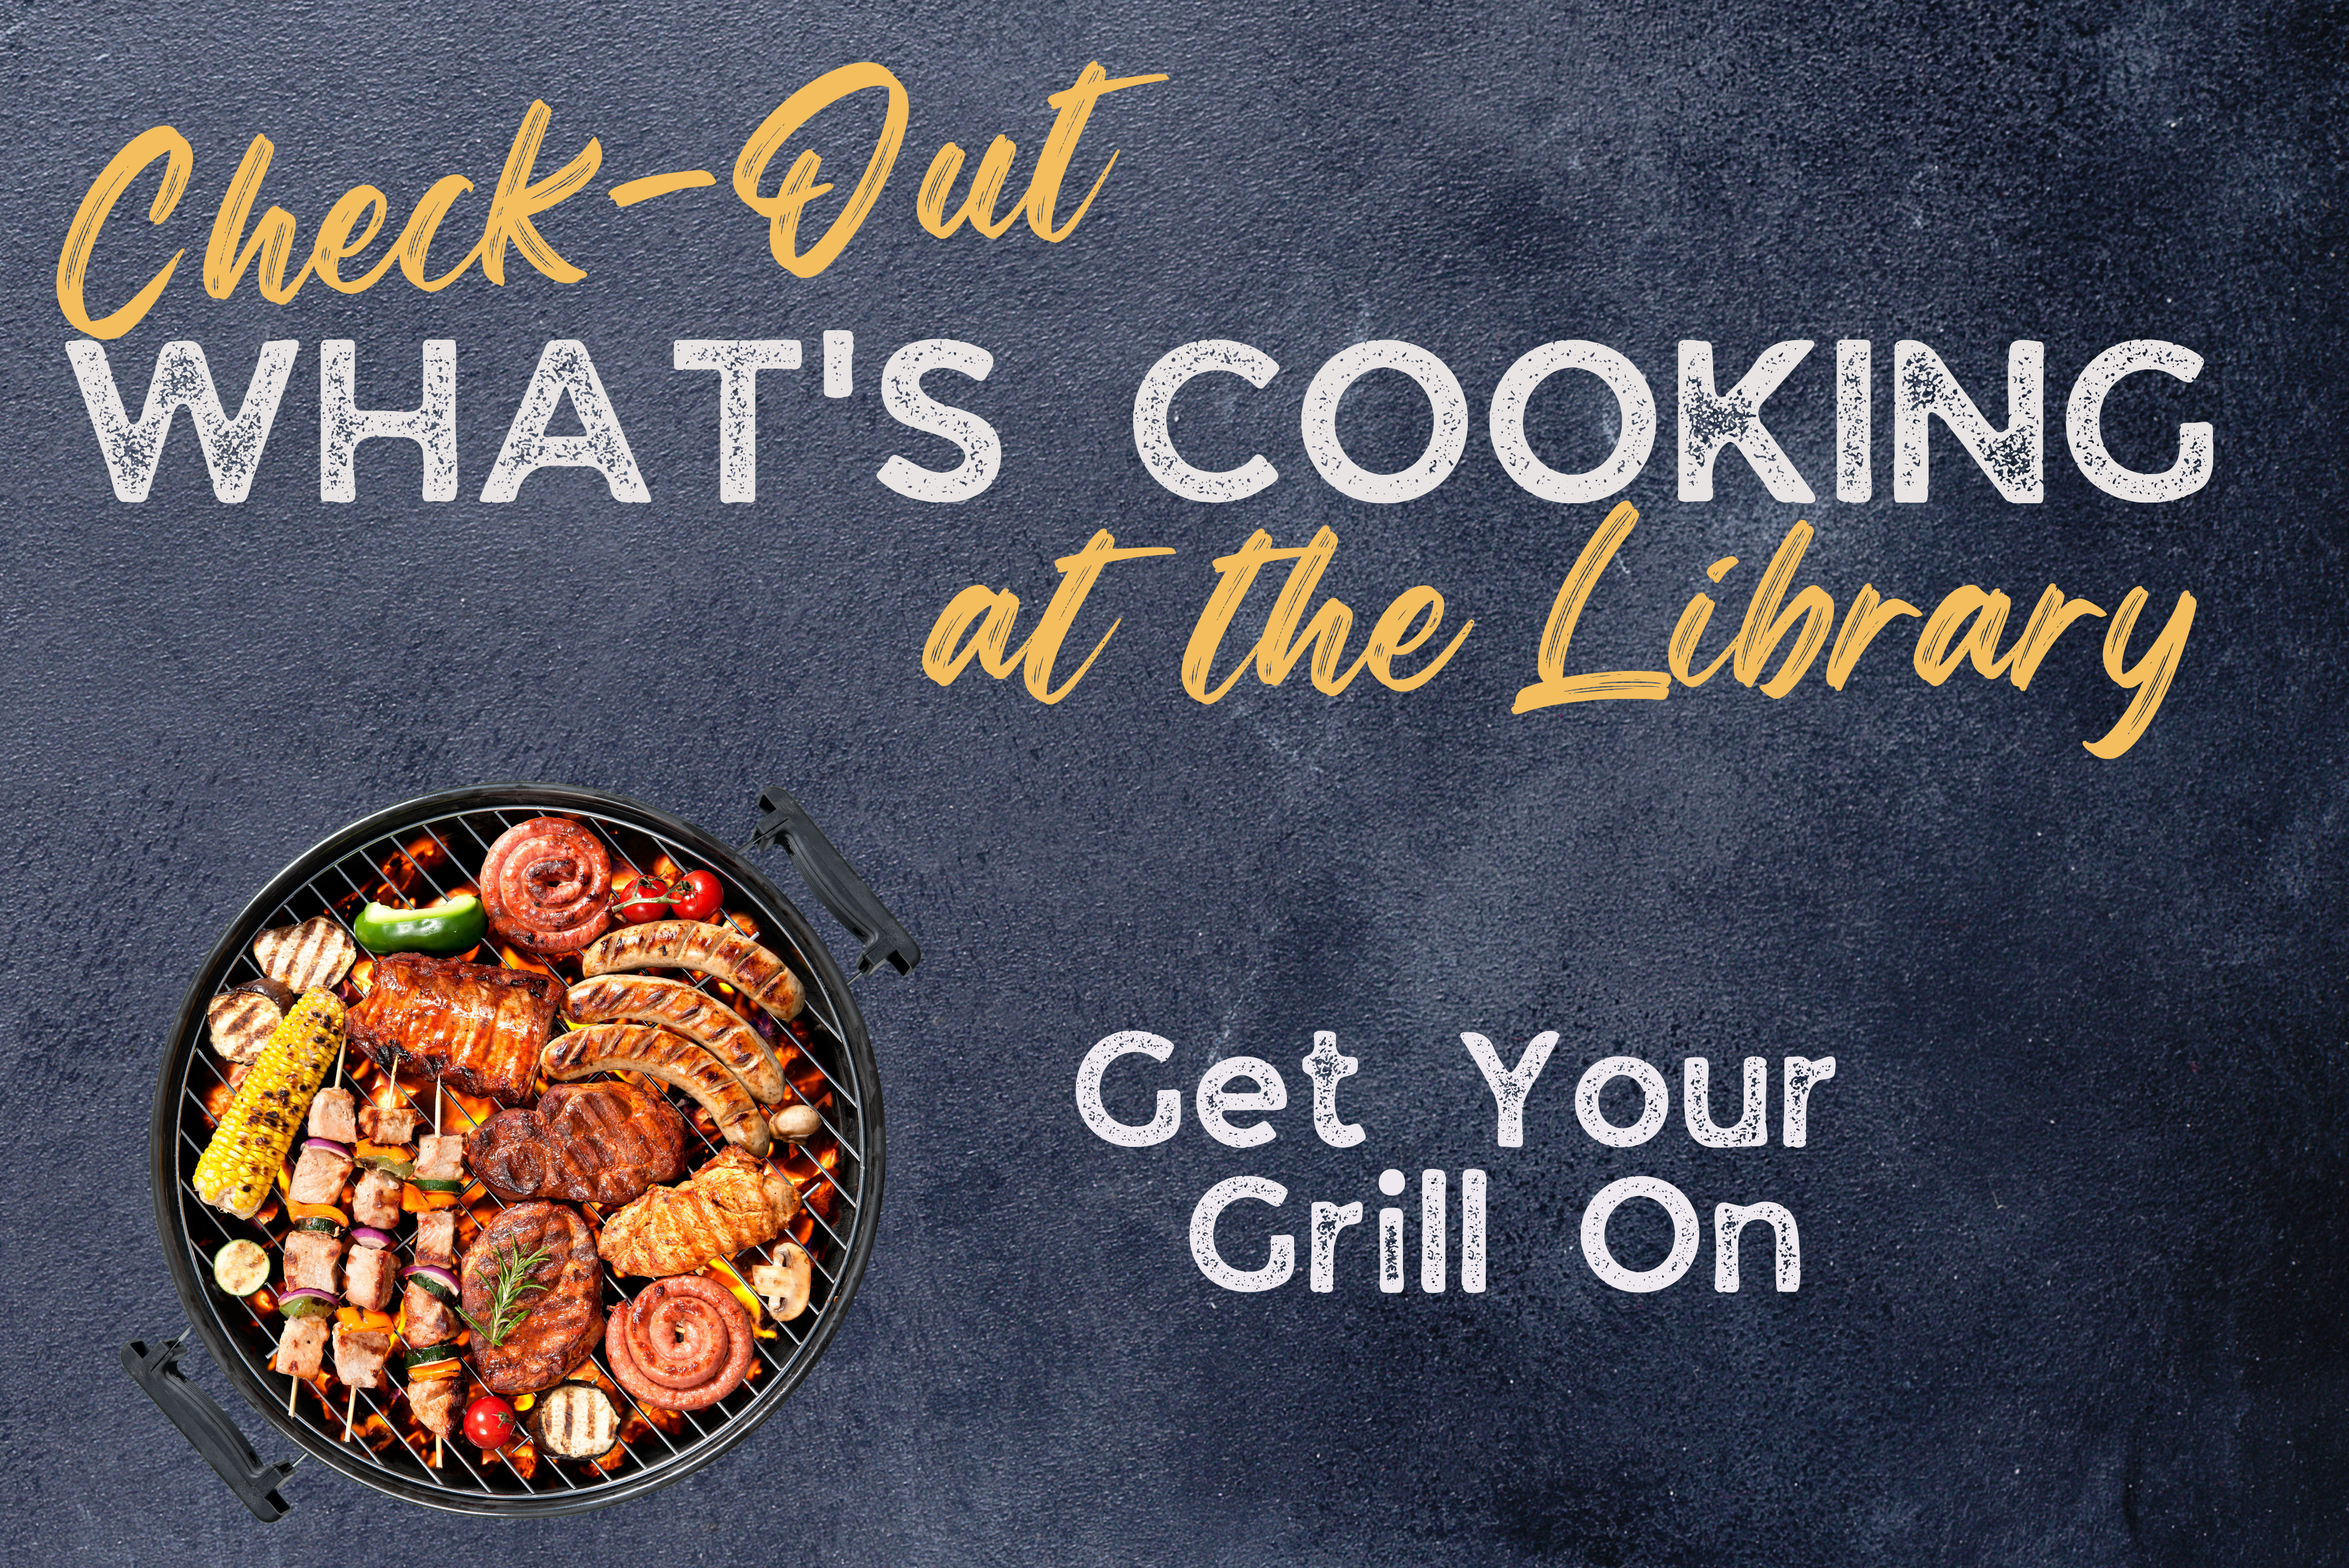 Get Your Grill On